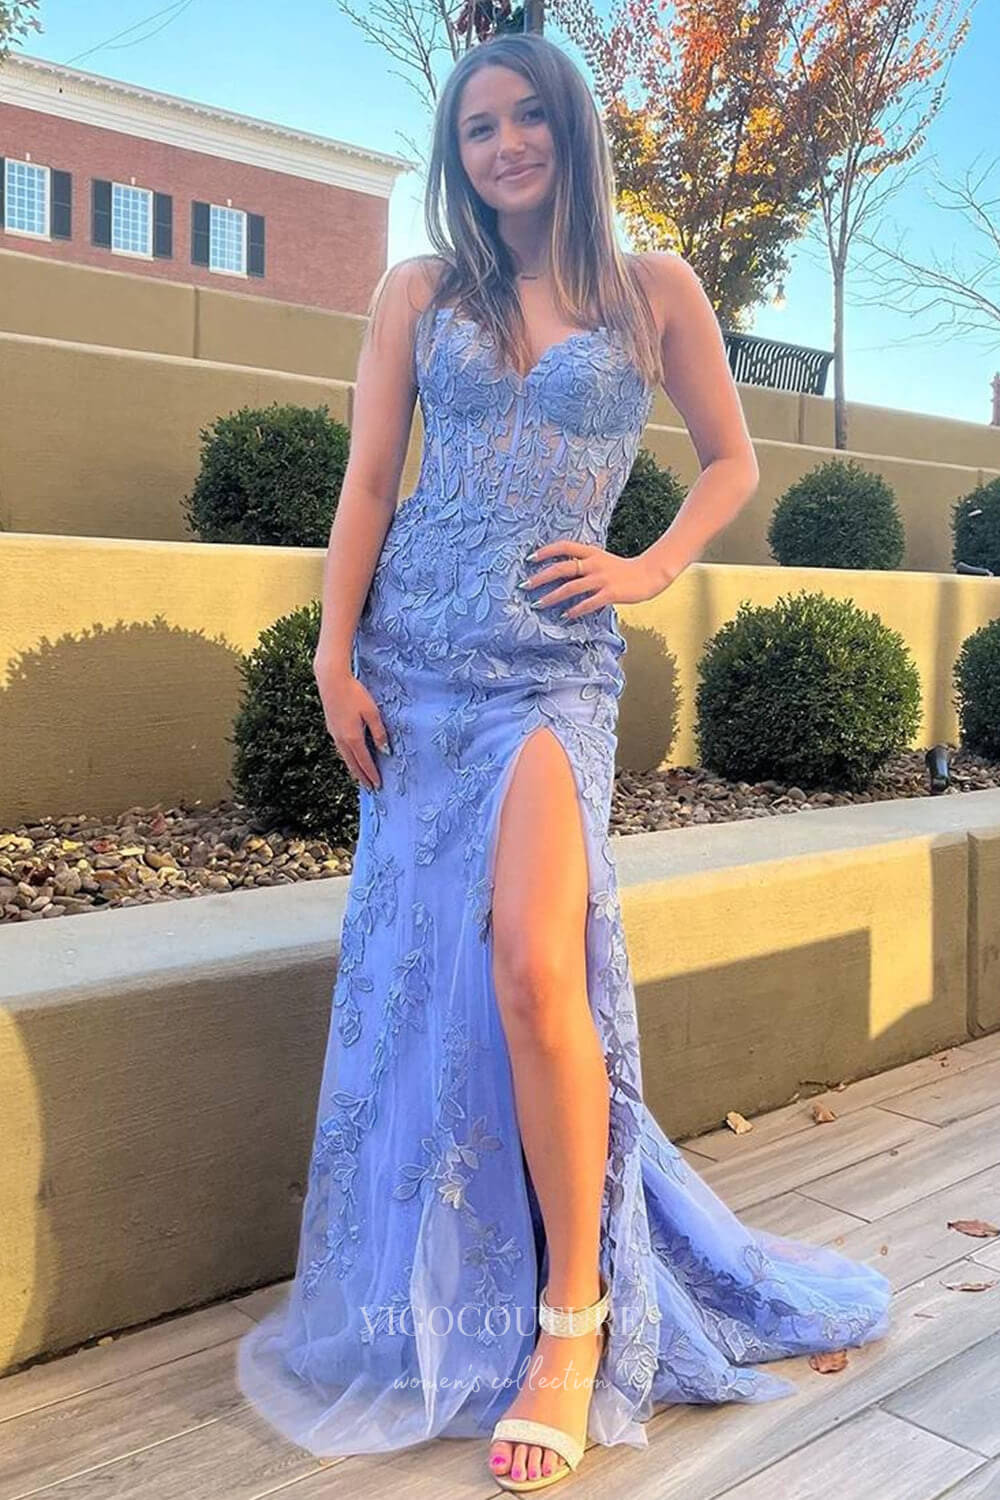 Strapless Lace Applique Prom Dresses with Slit Mermaid Sweetheart Neck Evening Dress 22170-Prom Dresses-vigocouture-Blue-US2-vigocouture